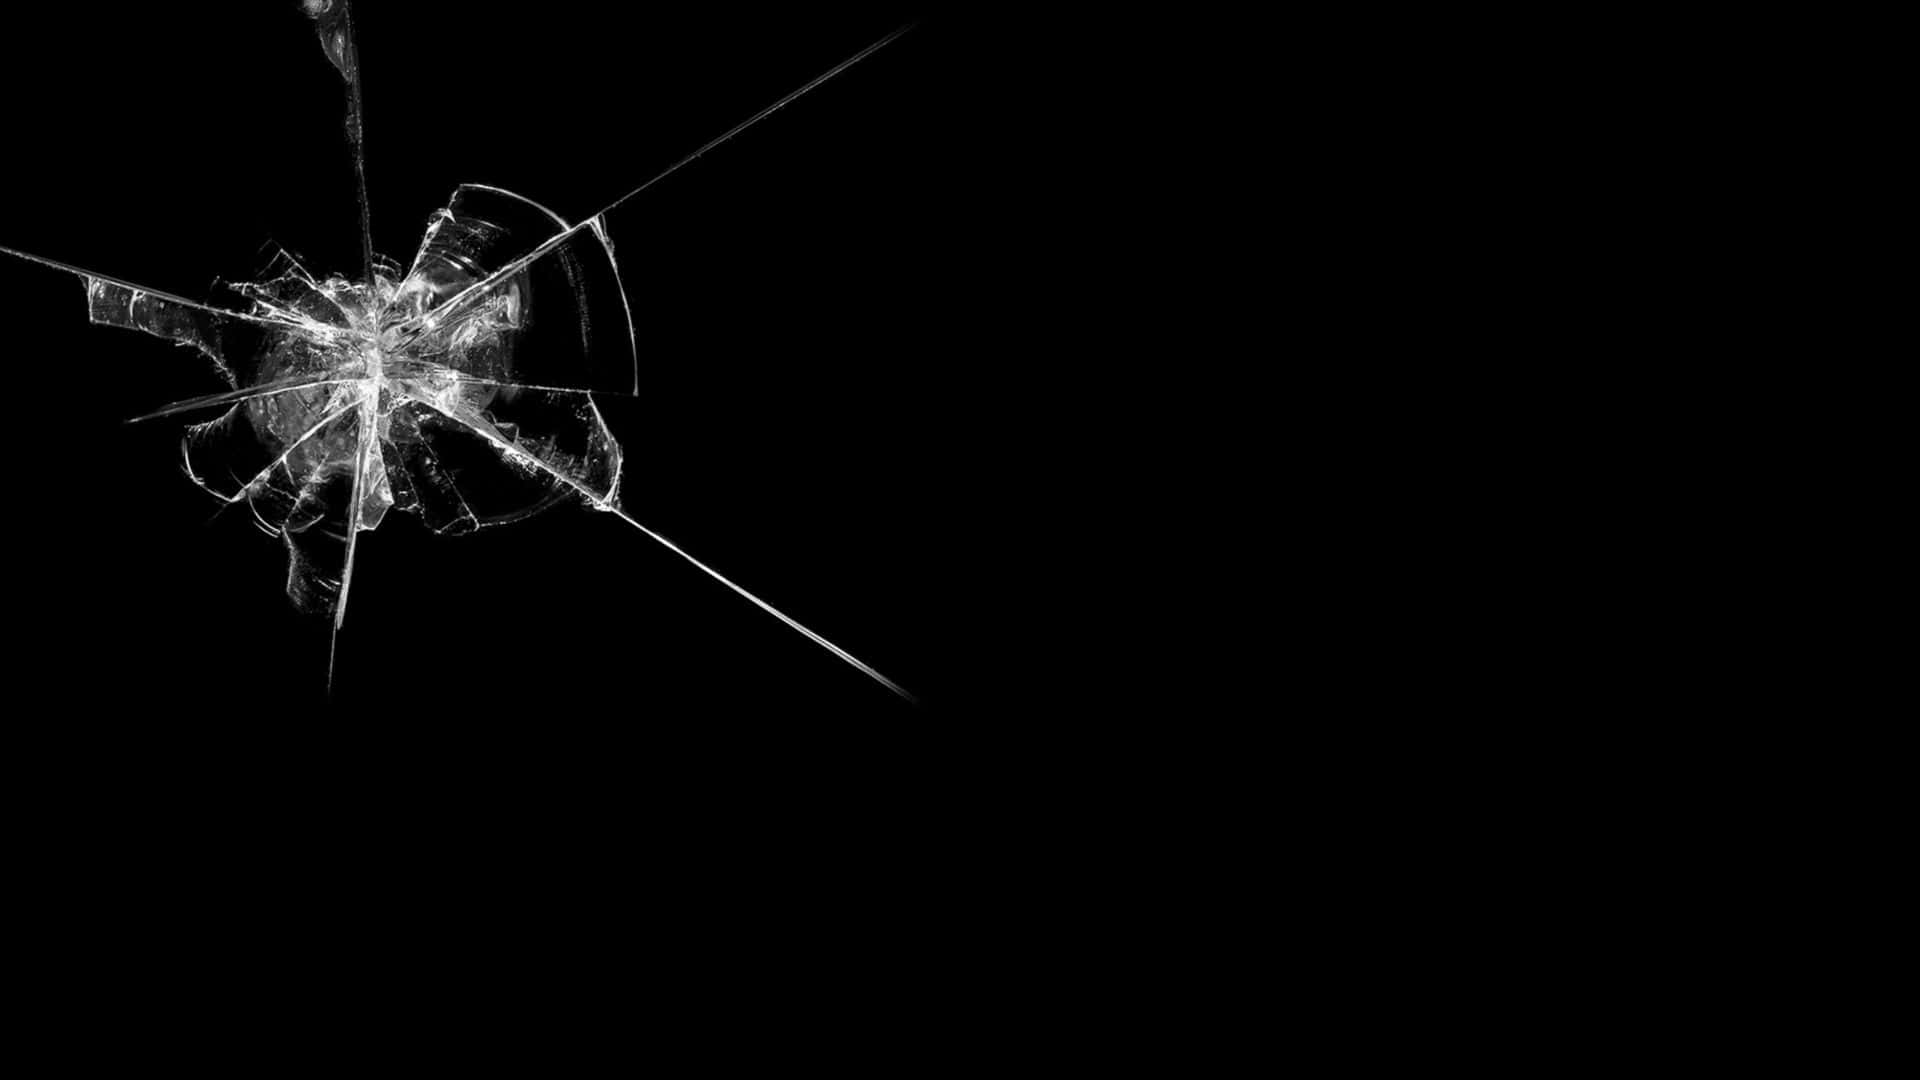 A Black Background With A Broken Glass